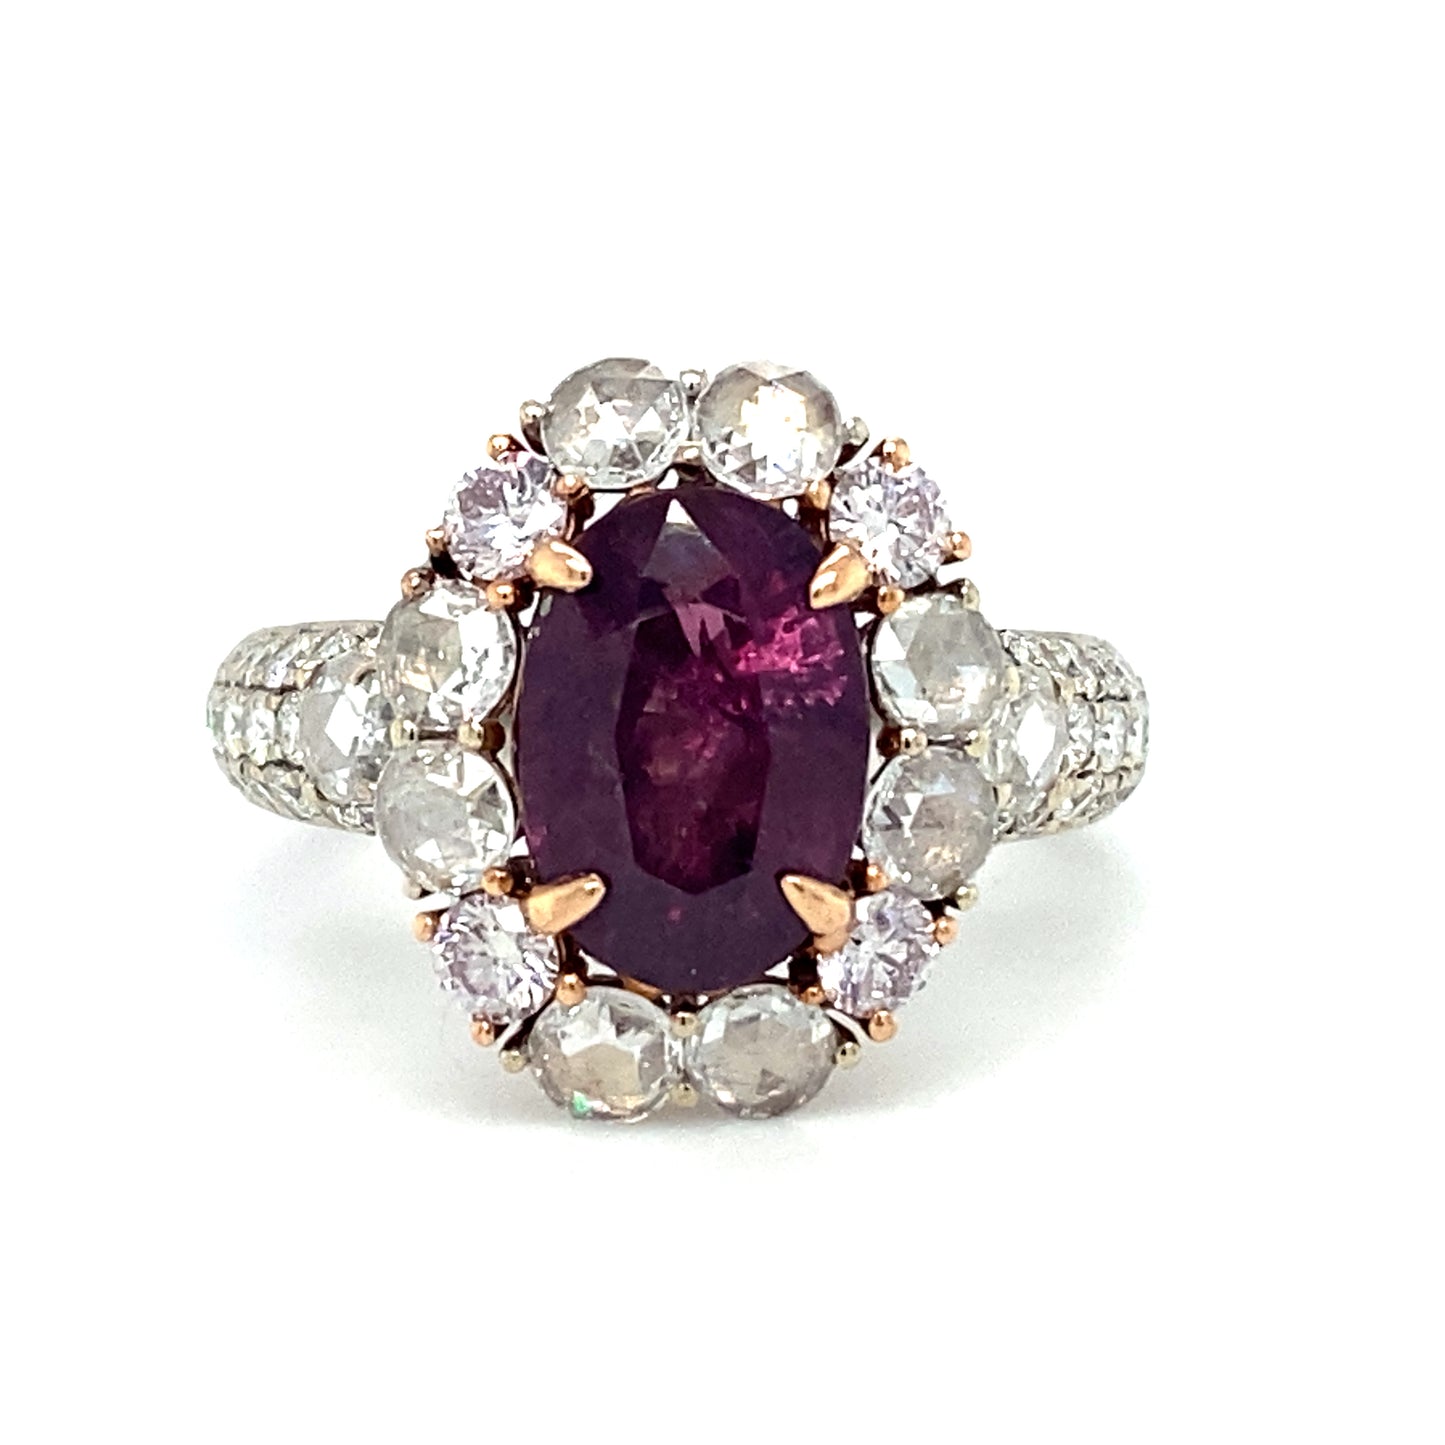 MODANI Oval Purple Sapphire and Diamond Cocktail Ring in 18K White Gold